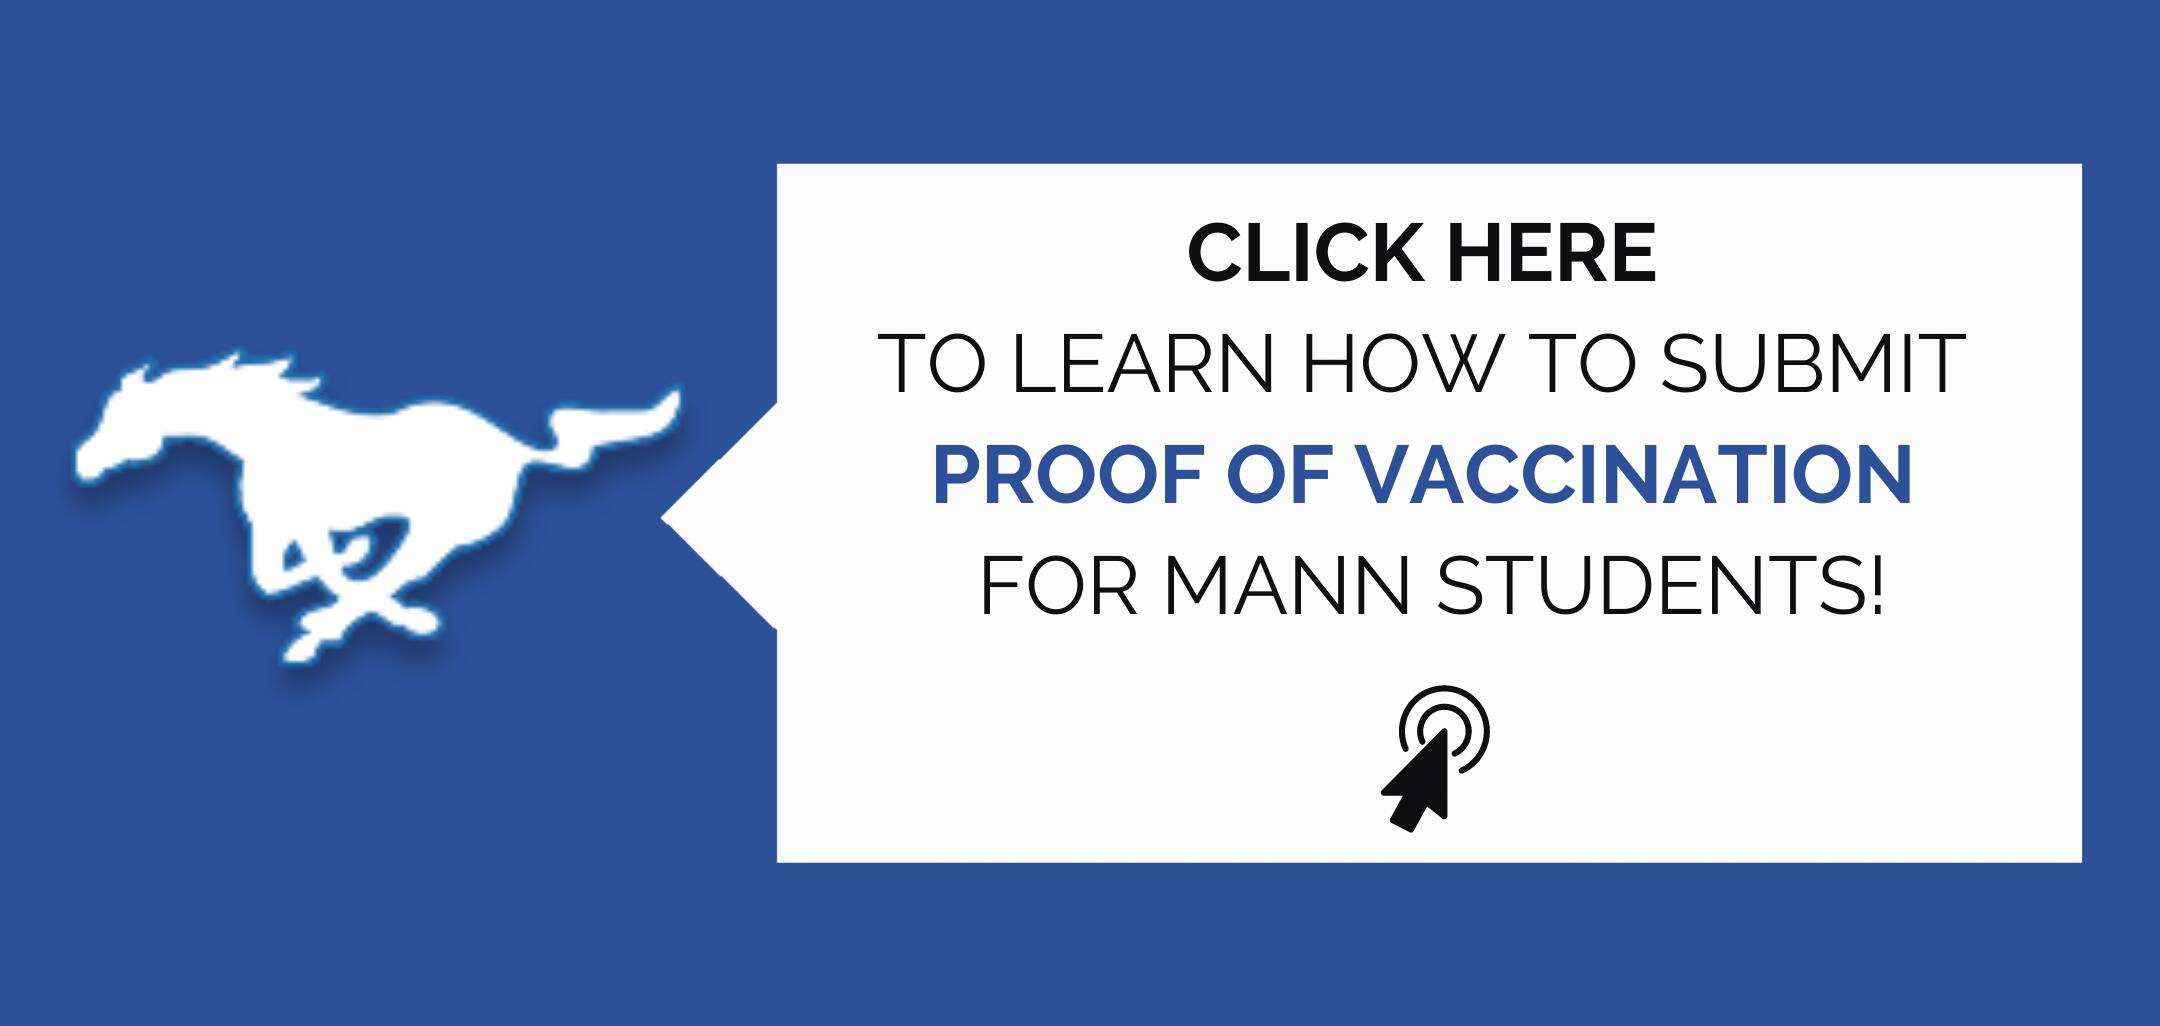 Learn how to submit proof of vaccination for Mann students